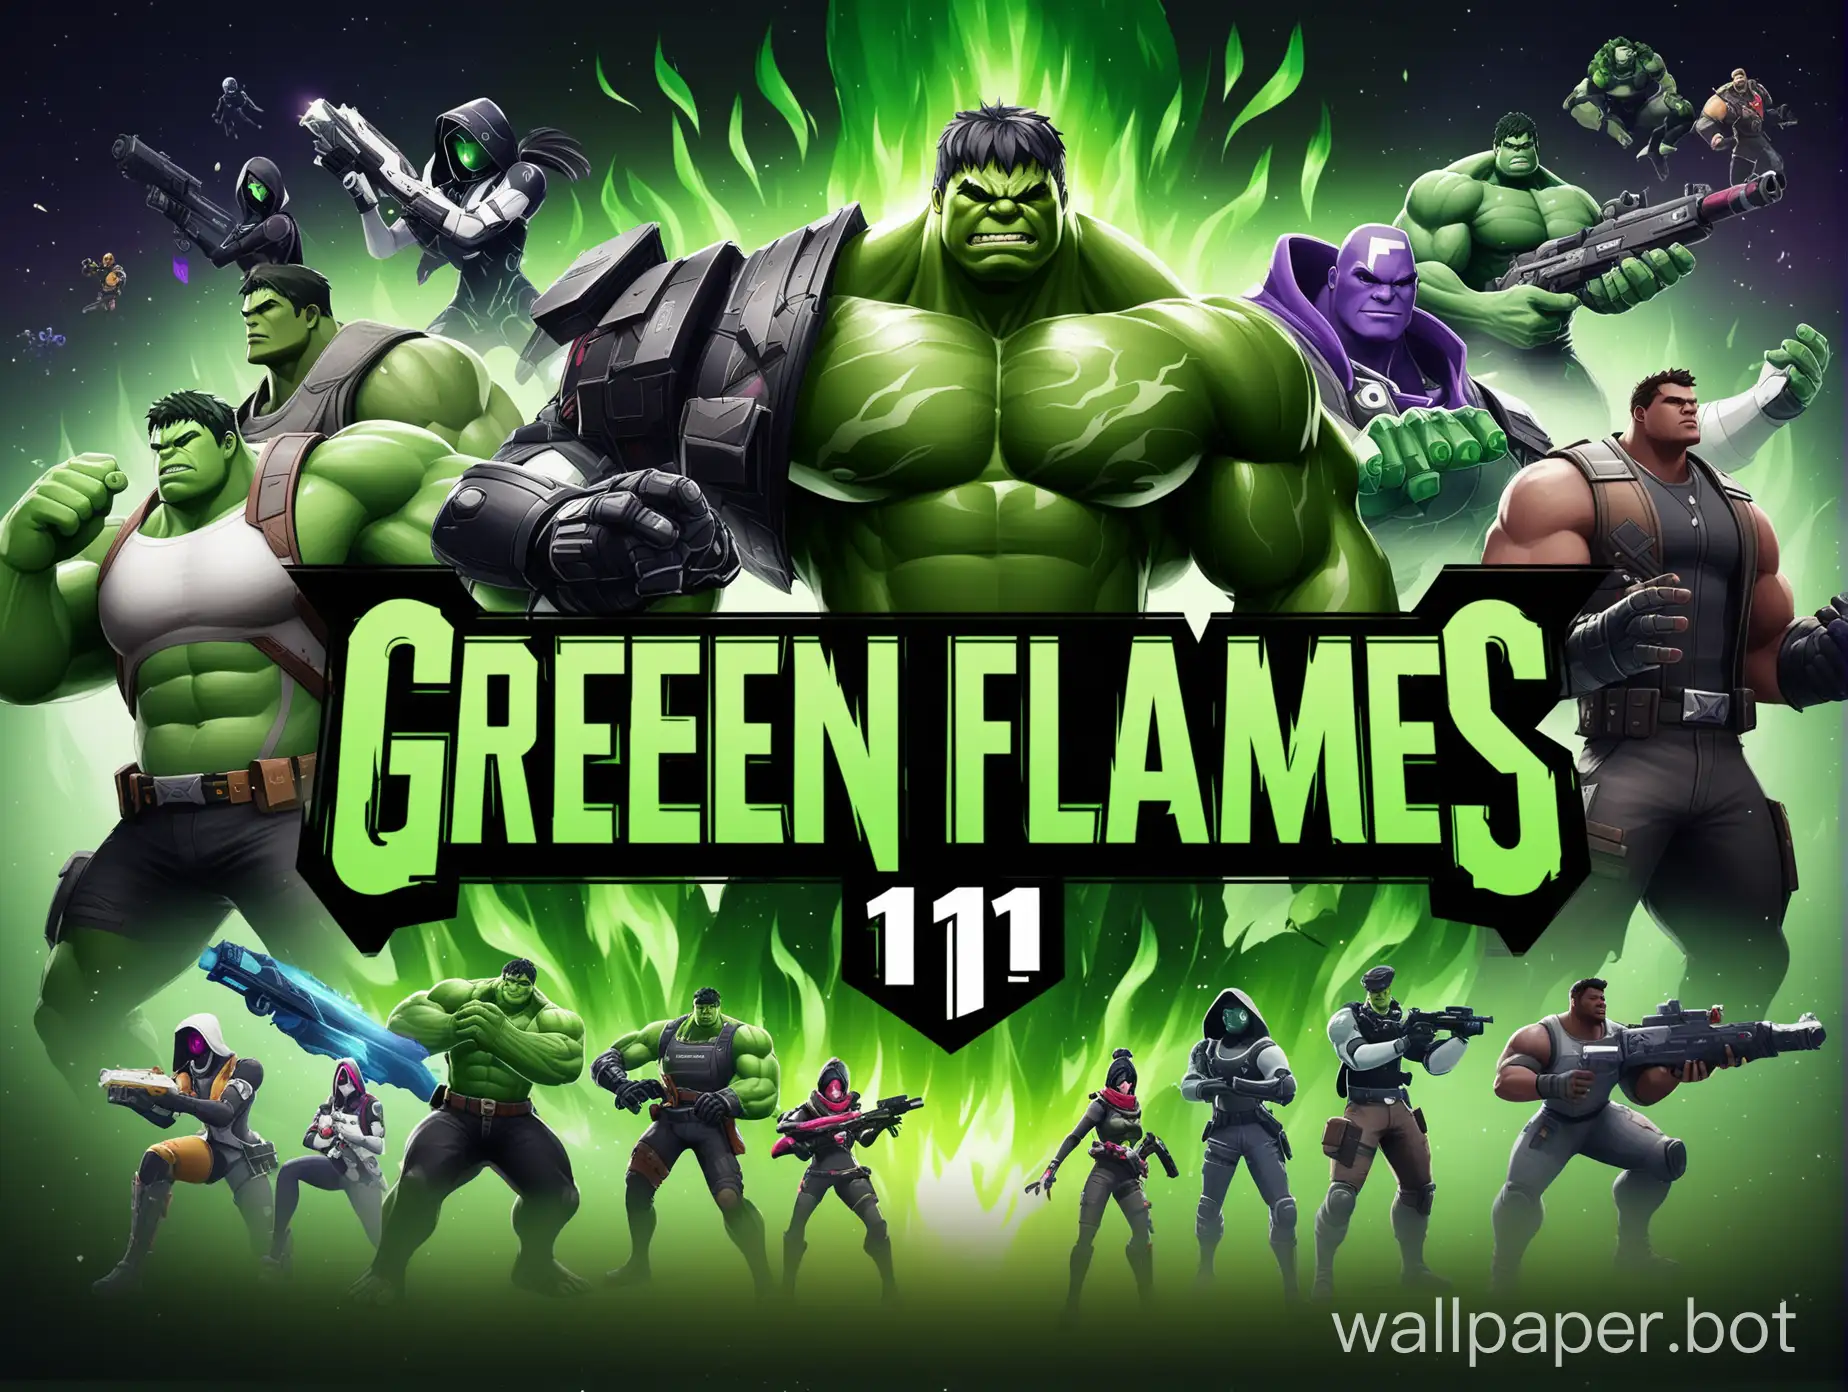 title 'Green Flames 1' with green and black, gaming theme, include destiny 2, arms, hulk, fortnite, and other games